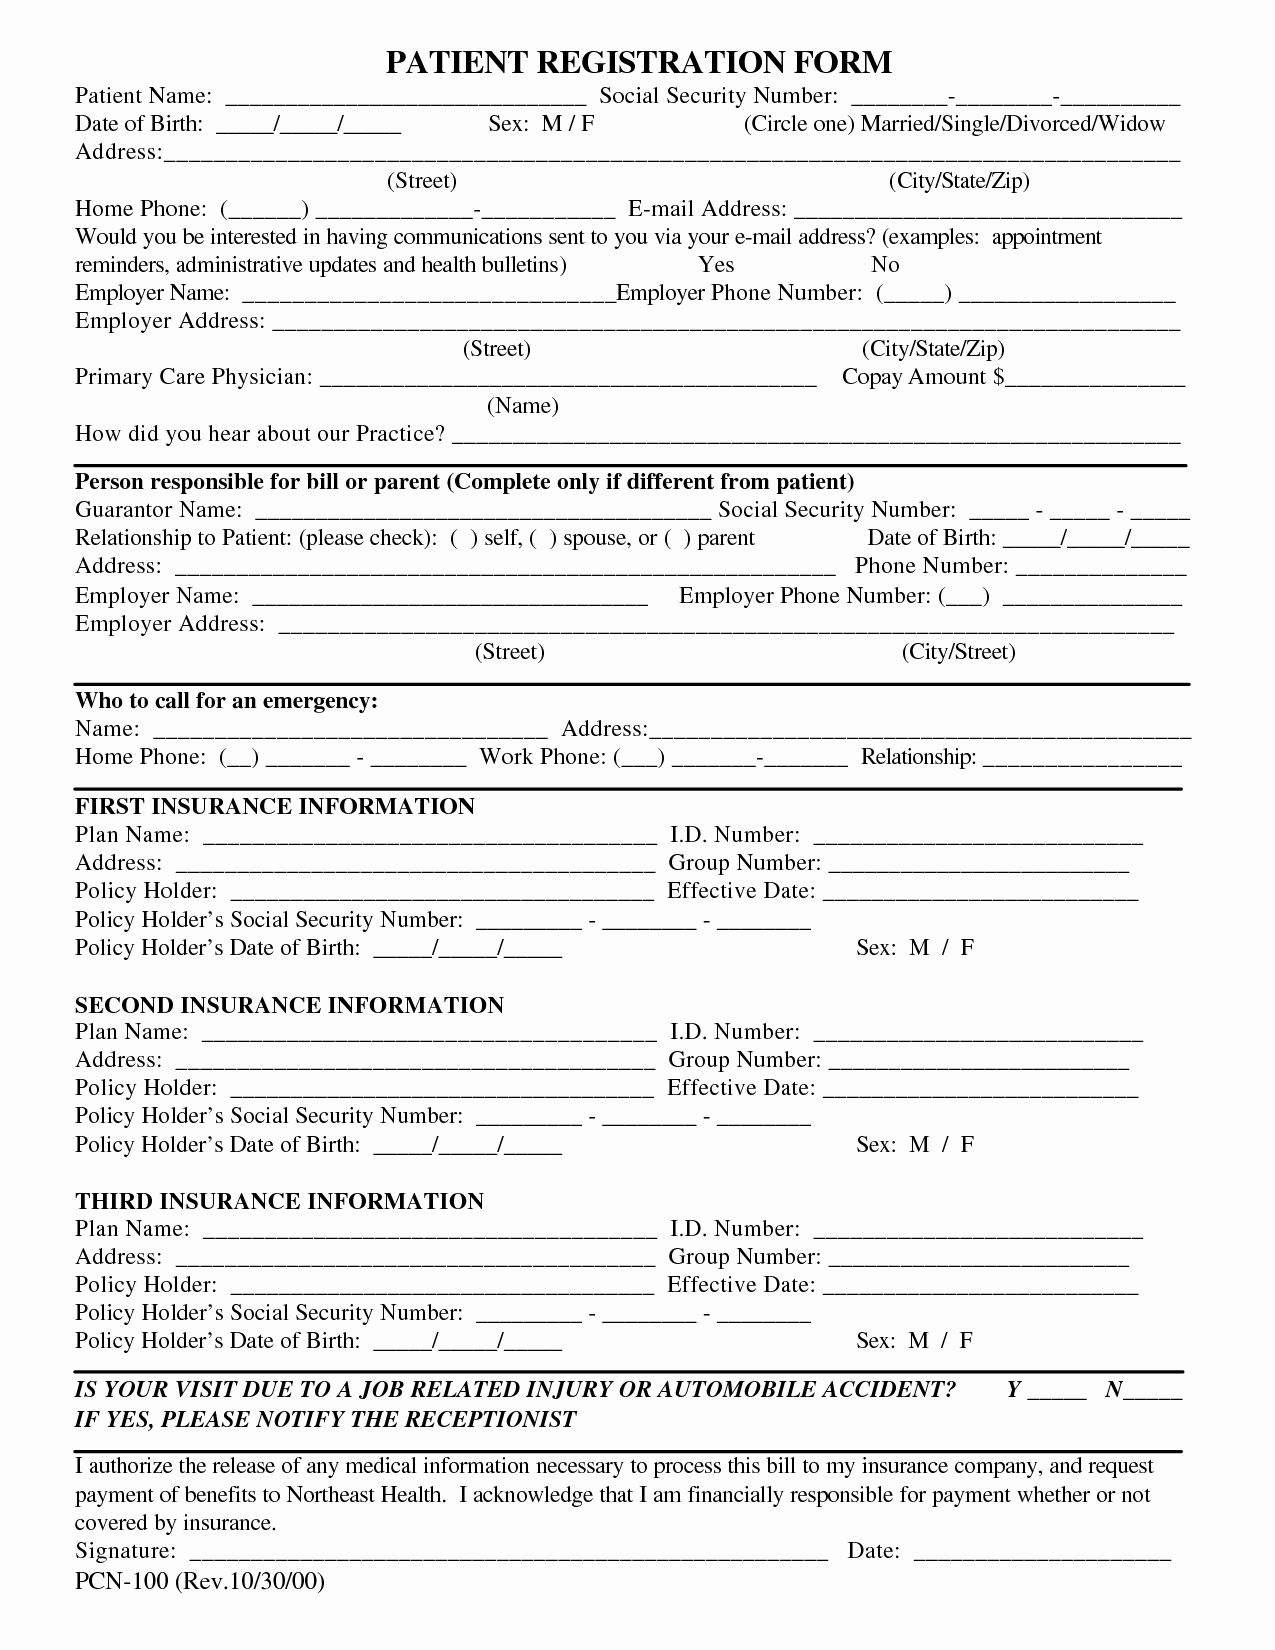 Patient Health History form Template Inspirational Free Patient Registration form Template